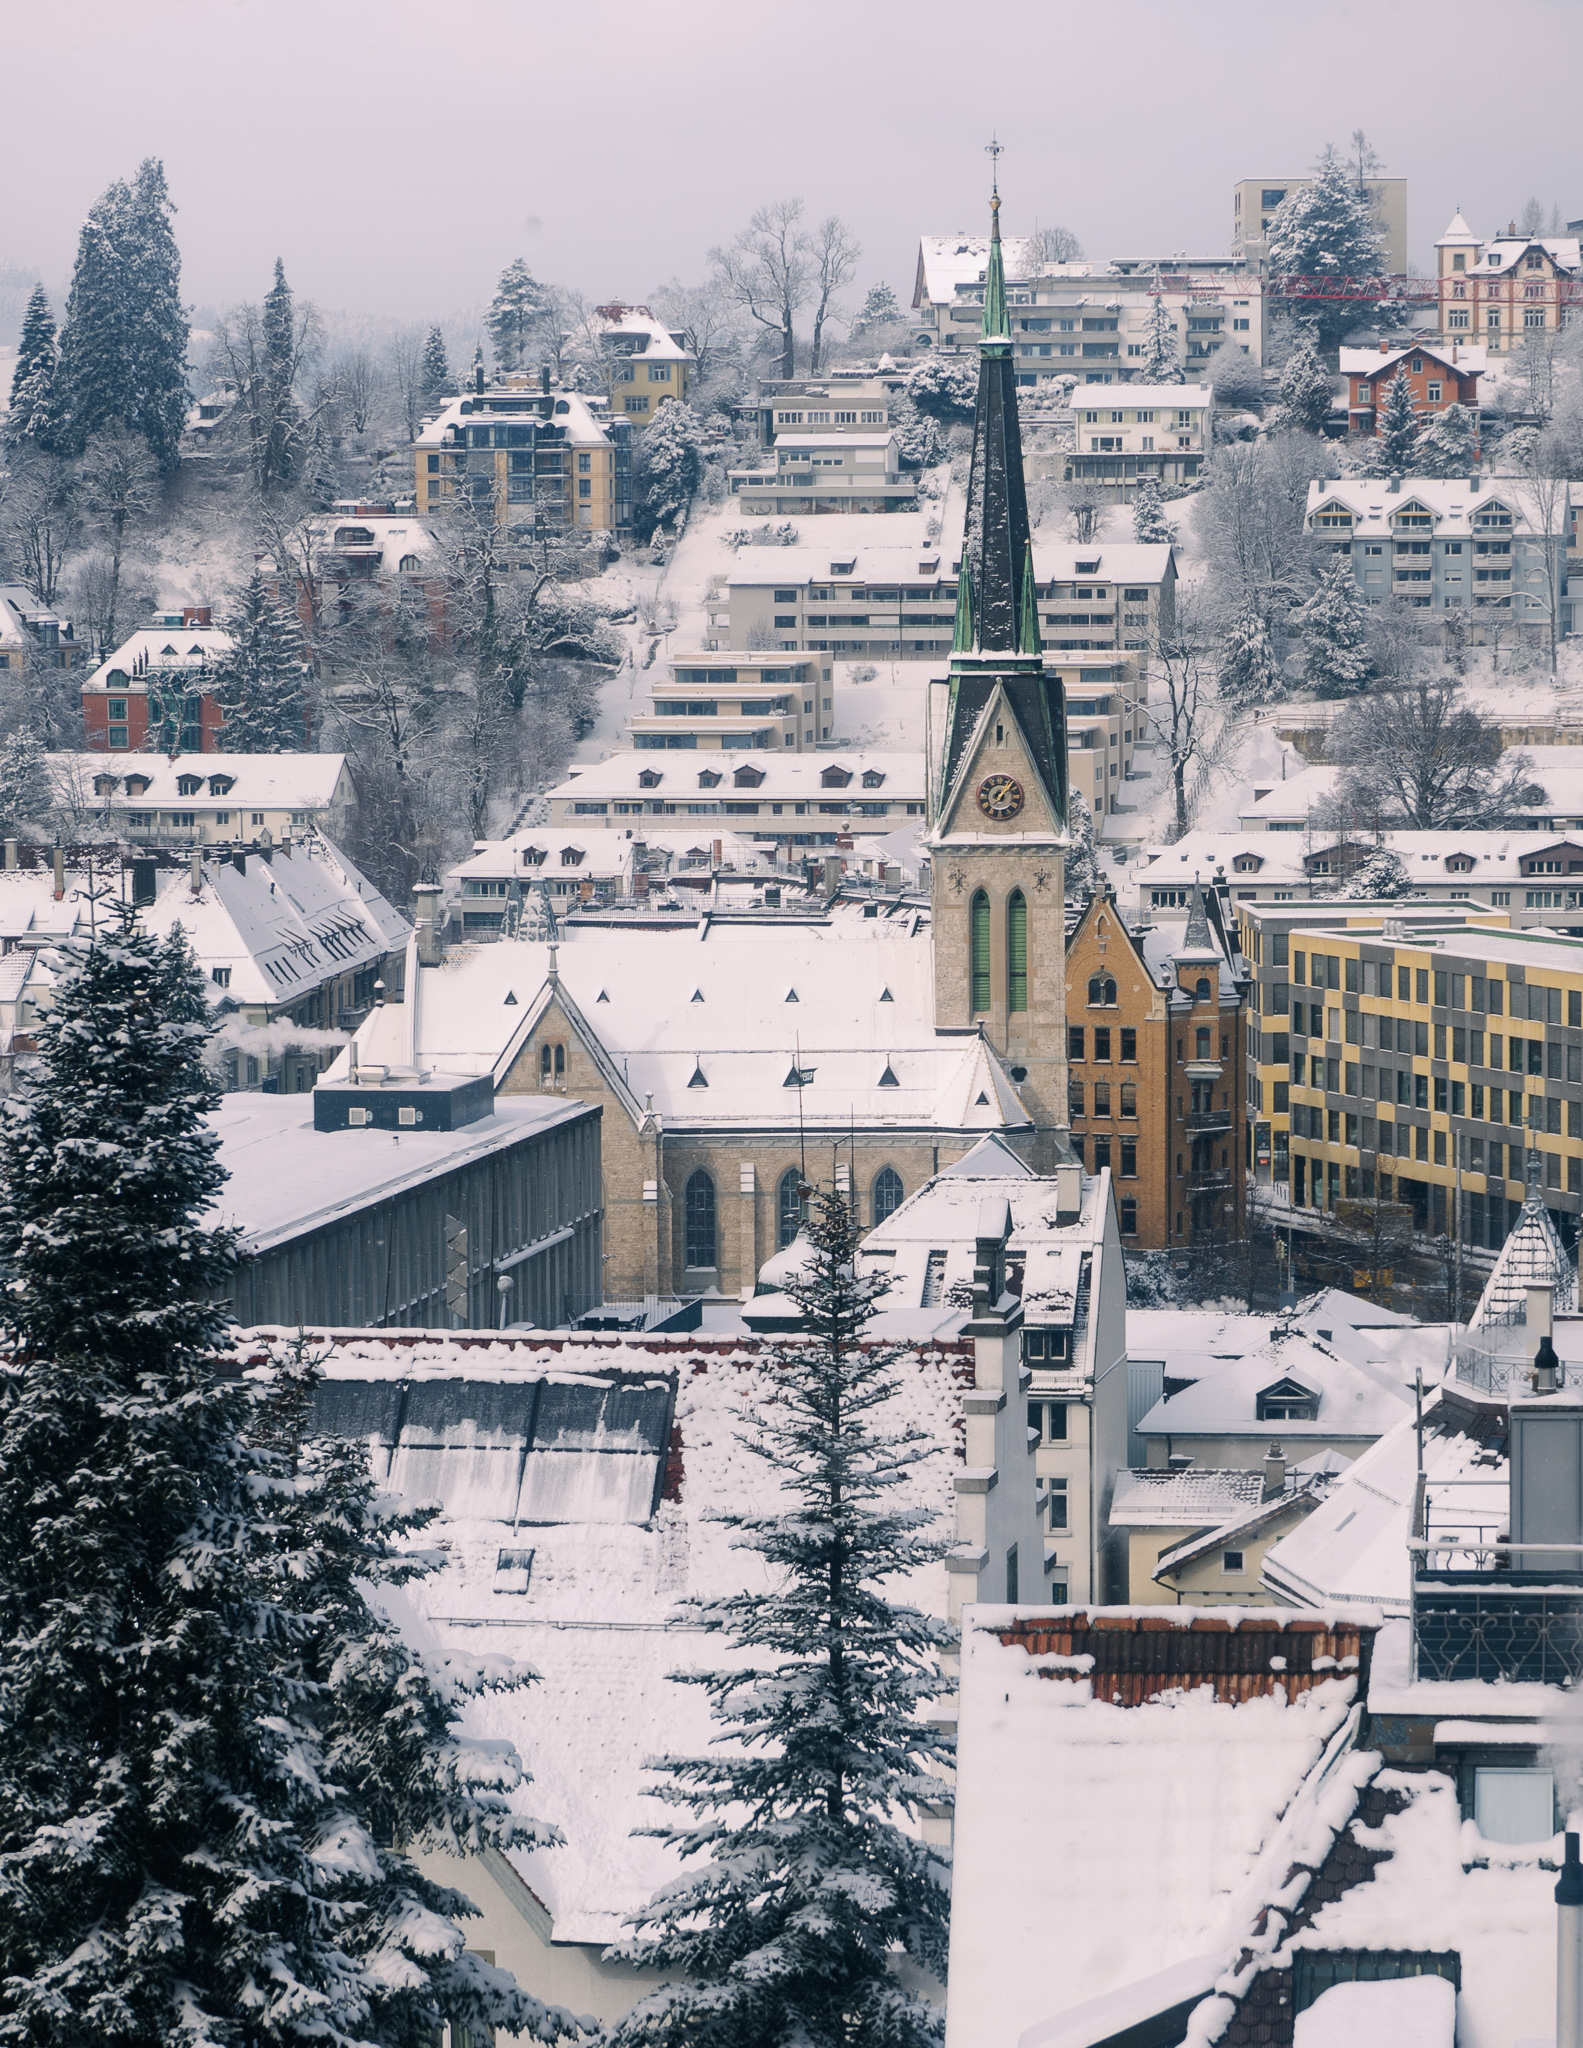 church in st. gallen in winter covered in snow with snowy surroundings, houses and trees.